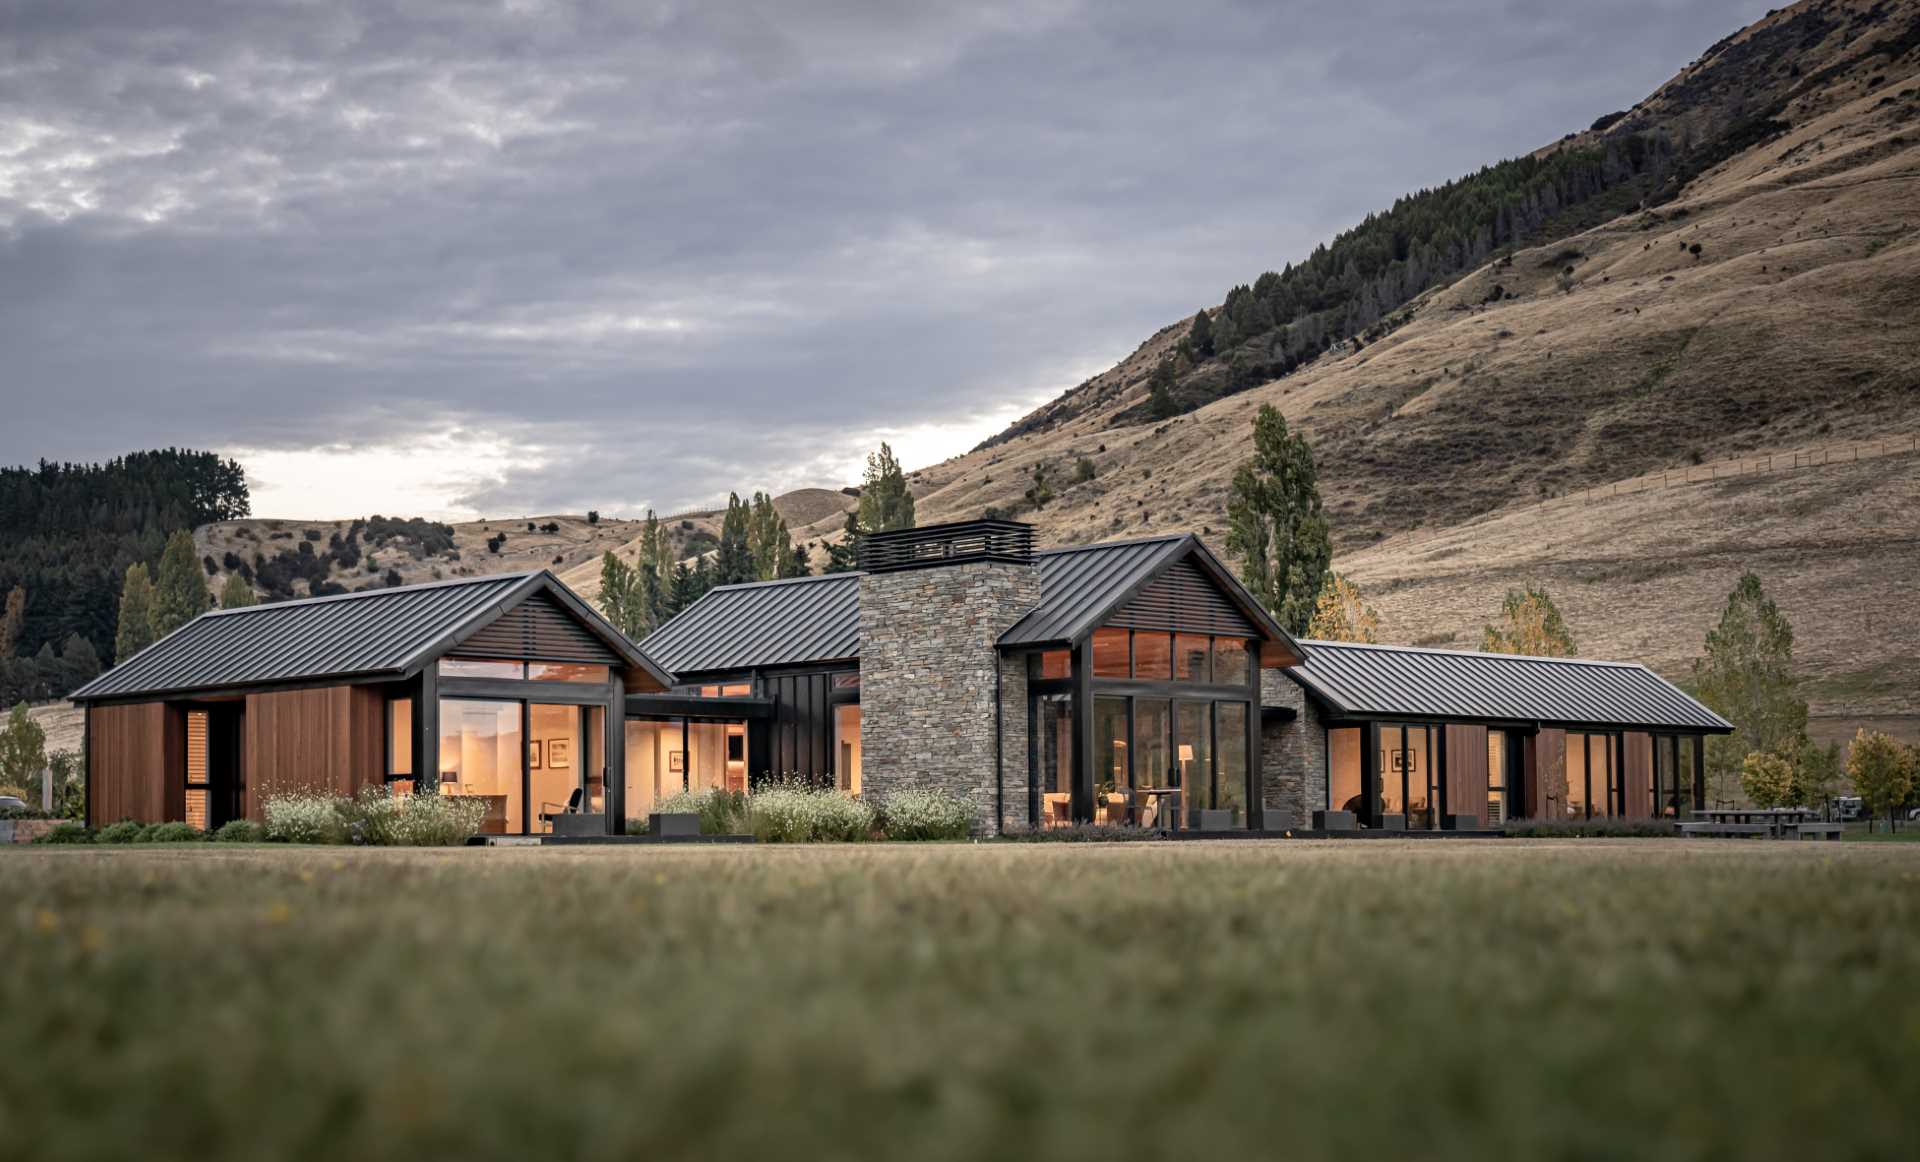 This modern house uses cedar in the build to add warmth, while metal was chosen as a low-maintenance contrasting material, and stone accents were added using Schist.